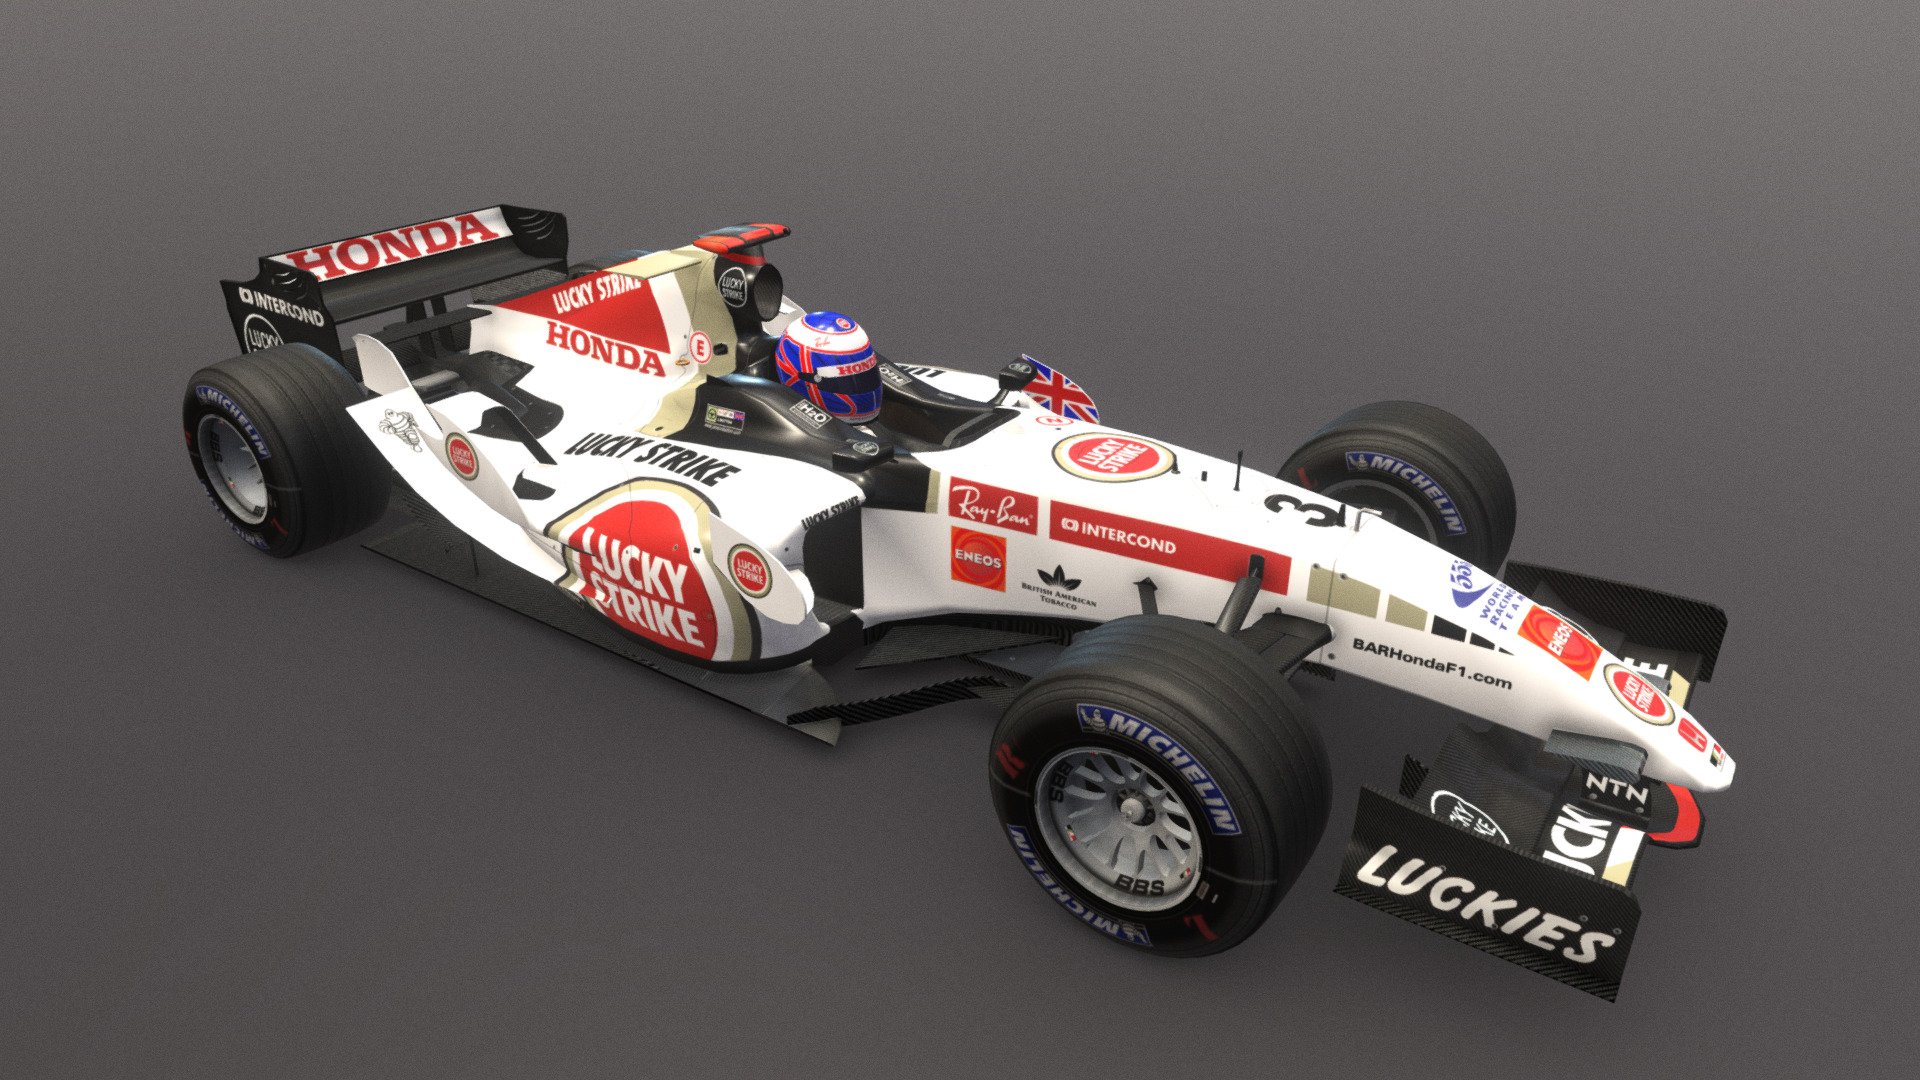 The BAR was created in 2005 for CTDP's F1 2005 mod. Originally the mod was released for F1 Challenge and later re-released in 2006 for rFactor.

The car model was created by Wai Keen Lam with textures by Daniel &lsquo;Dahie' Senff. Both set themselves up for a challenge: If Wai would create the model within four days, Daniel would finish the textures within the same week. Challenge accepted and passed. 😎 - BAR Honda 007 (2005) - 3D model by Cars & Tracks Development Project (@ctdp) 3d model